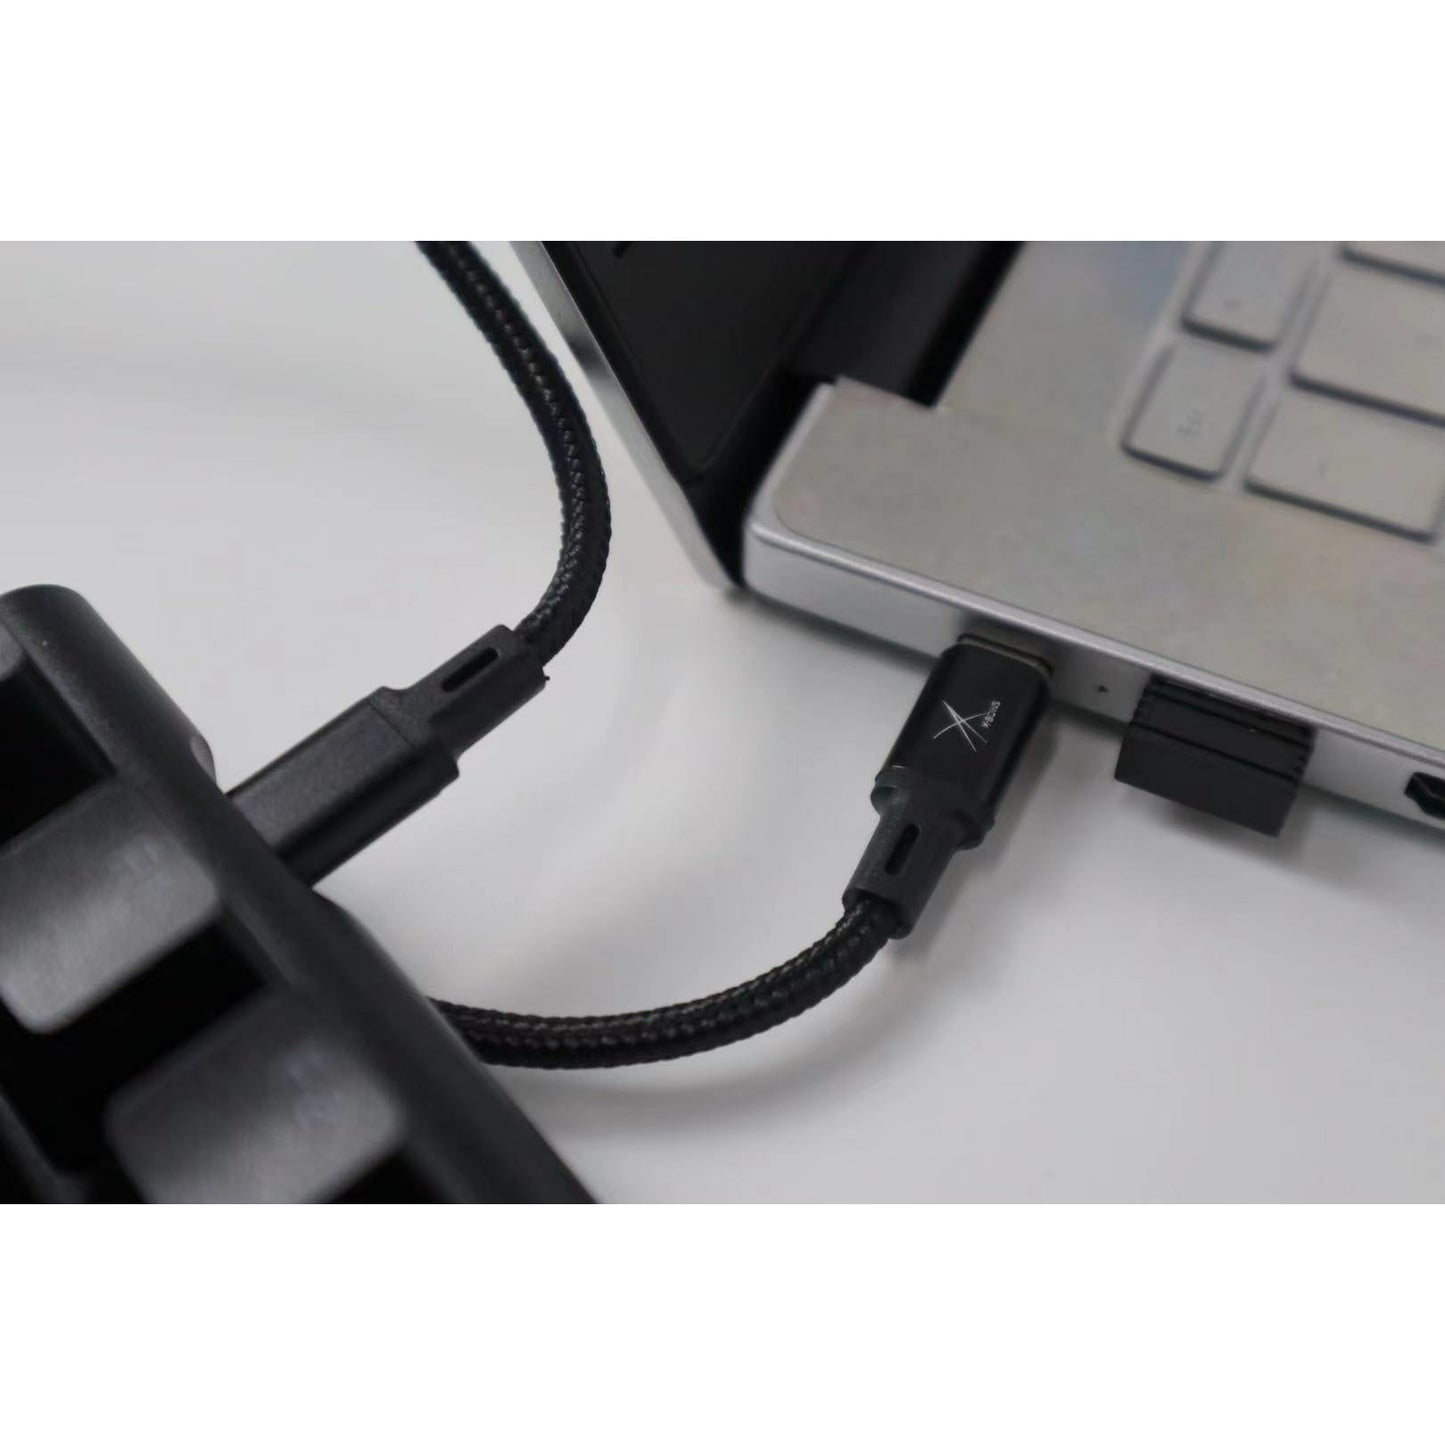 USB-C to USB-C Cable